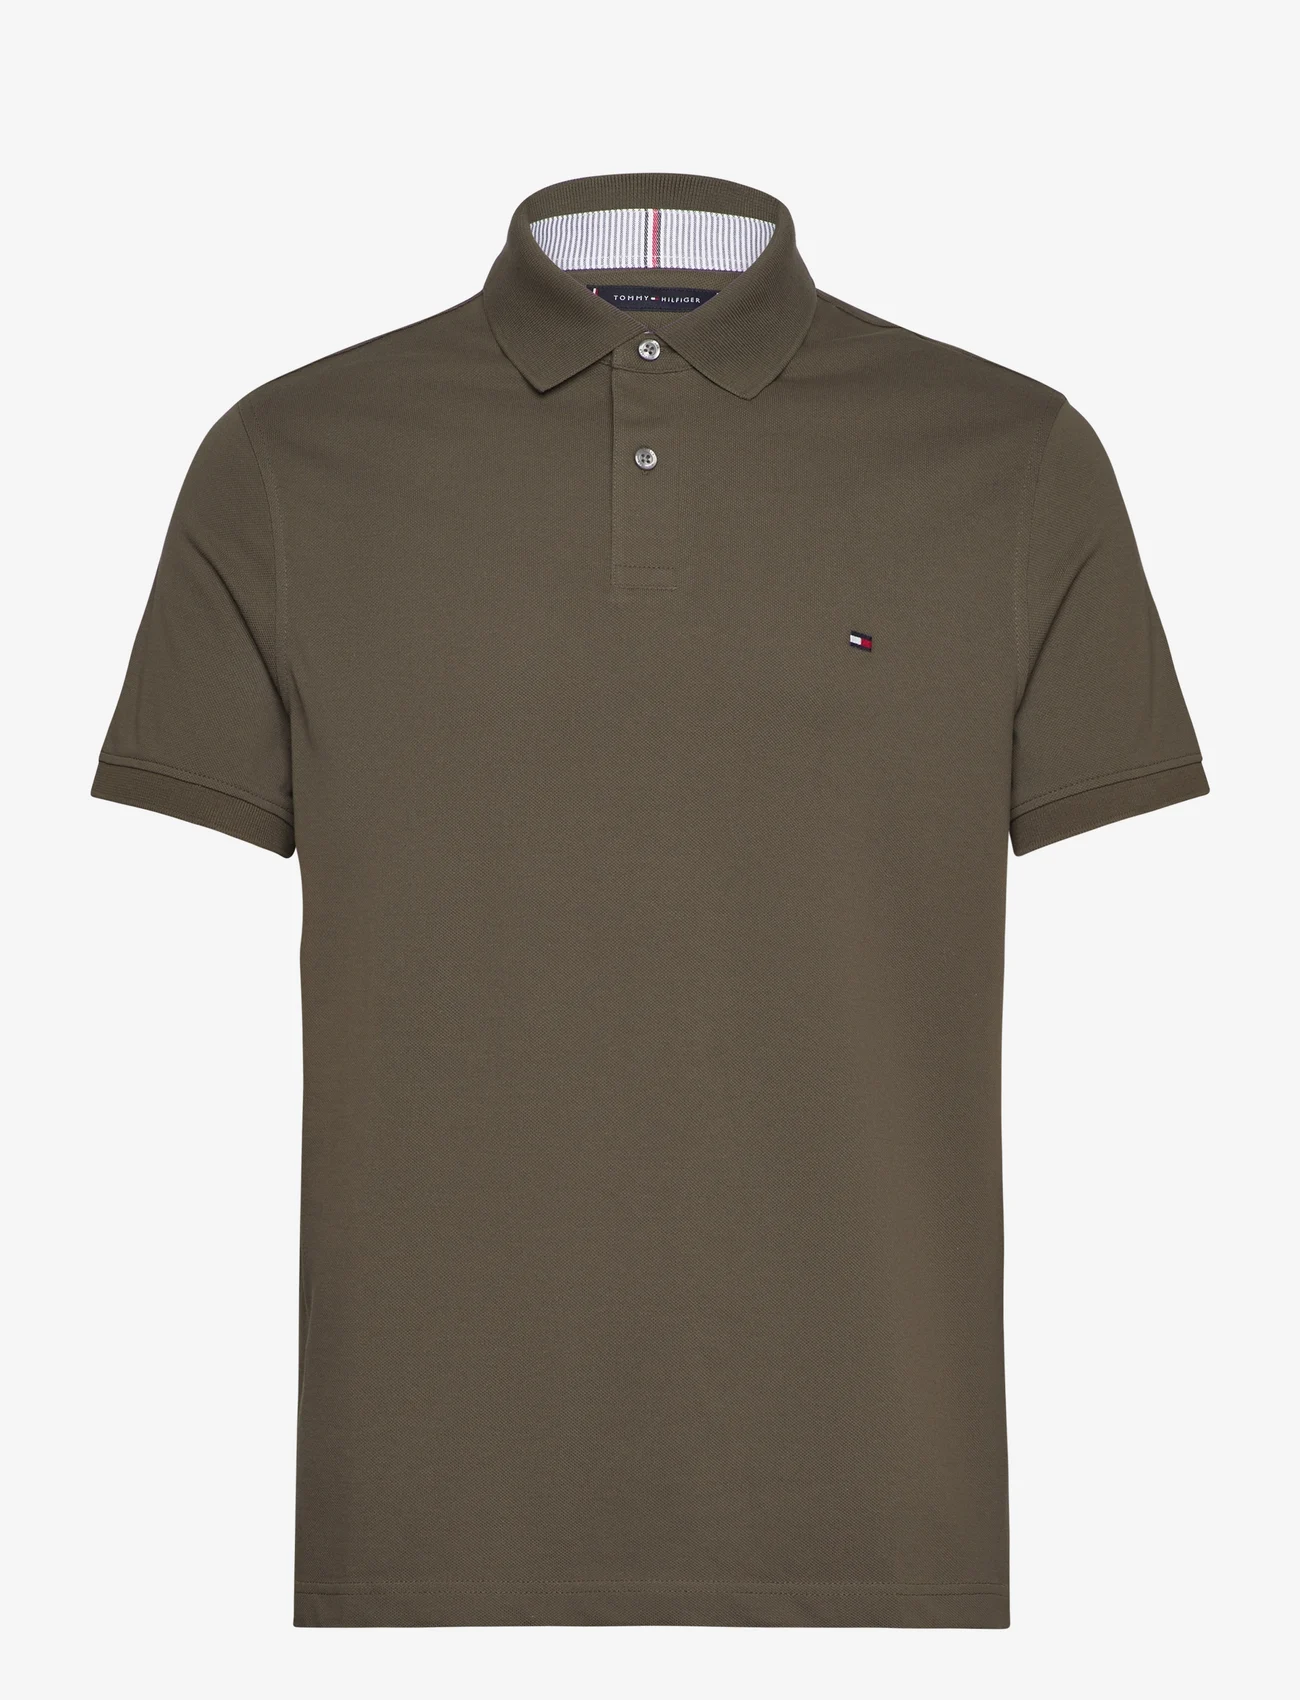 Tommy Hilfiger - CORE 1985 REGULAR POLO - poloshirts - army green - 0